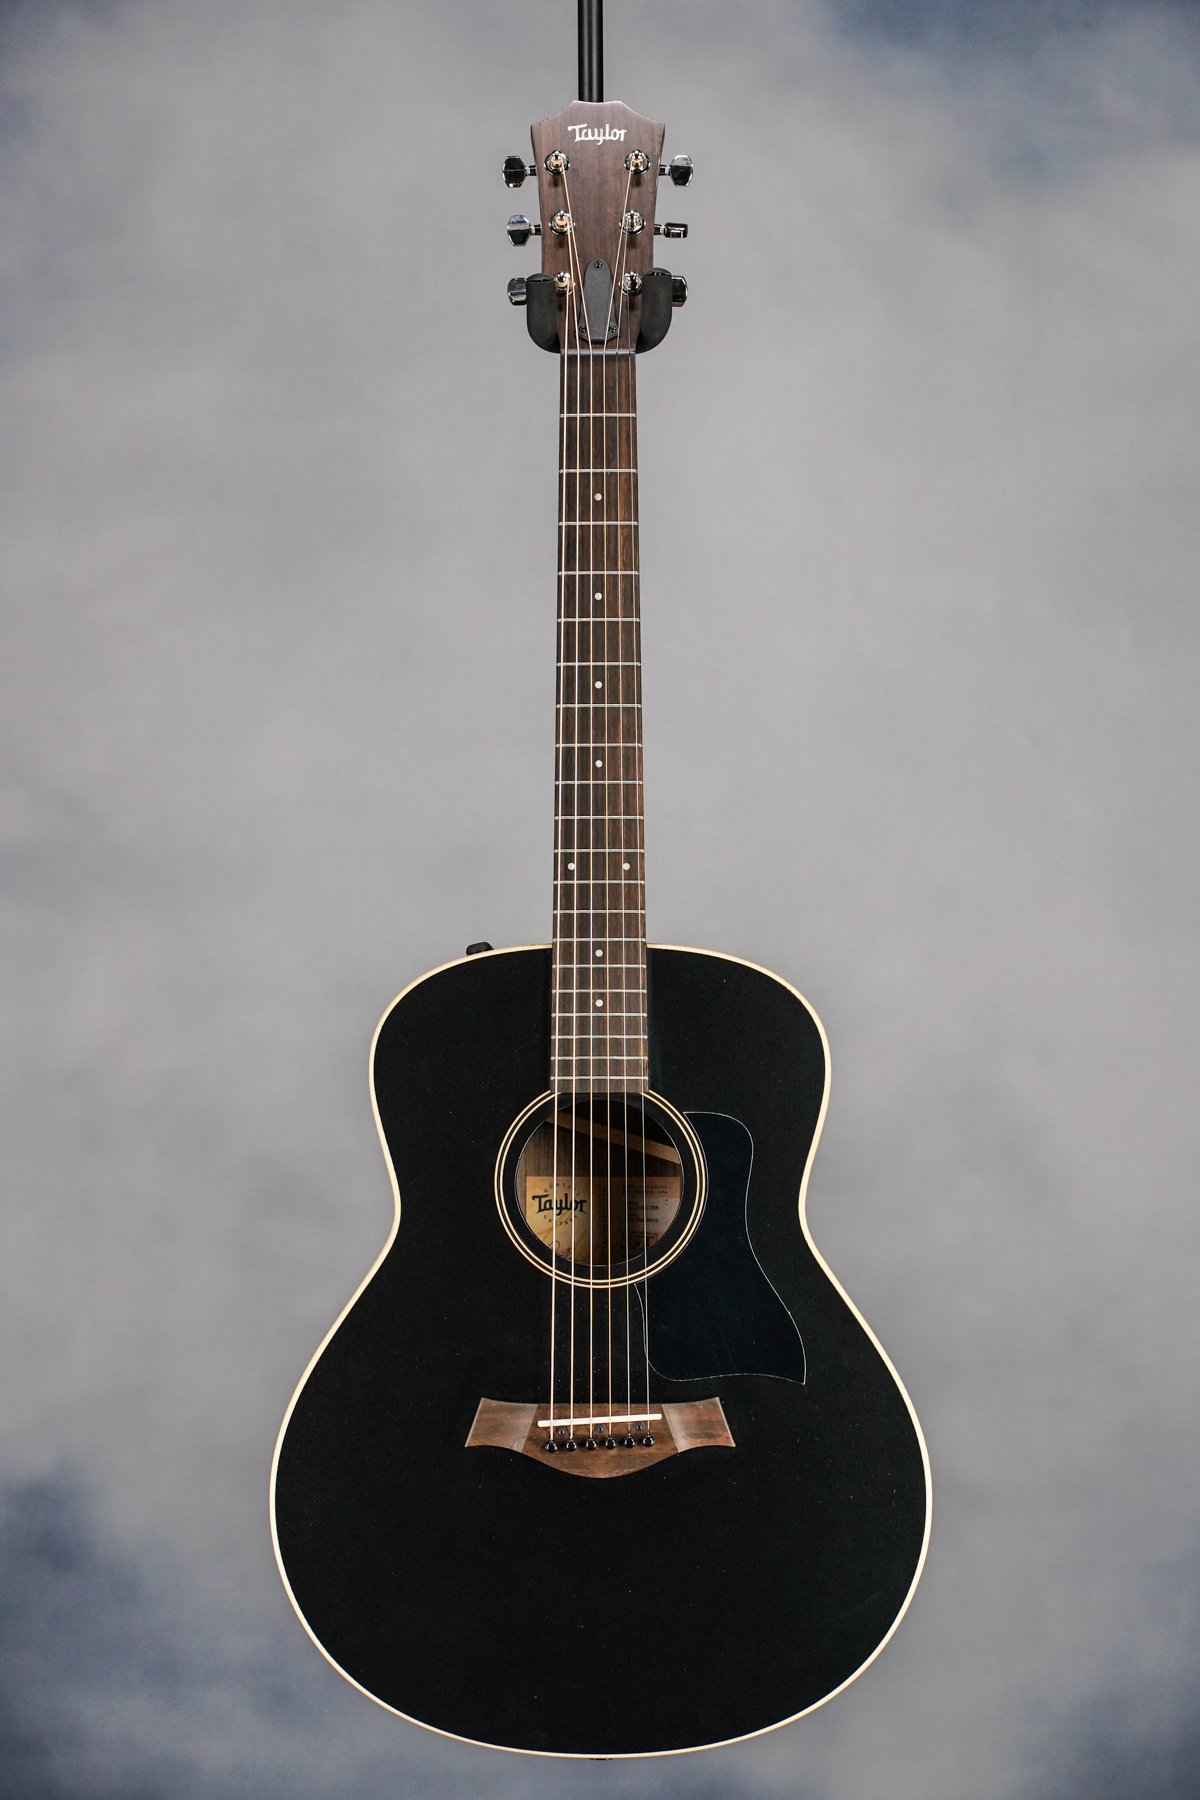 GTe Blacktop Grand Theater Electric Acoustic Guitar